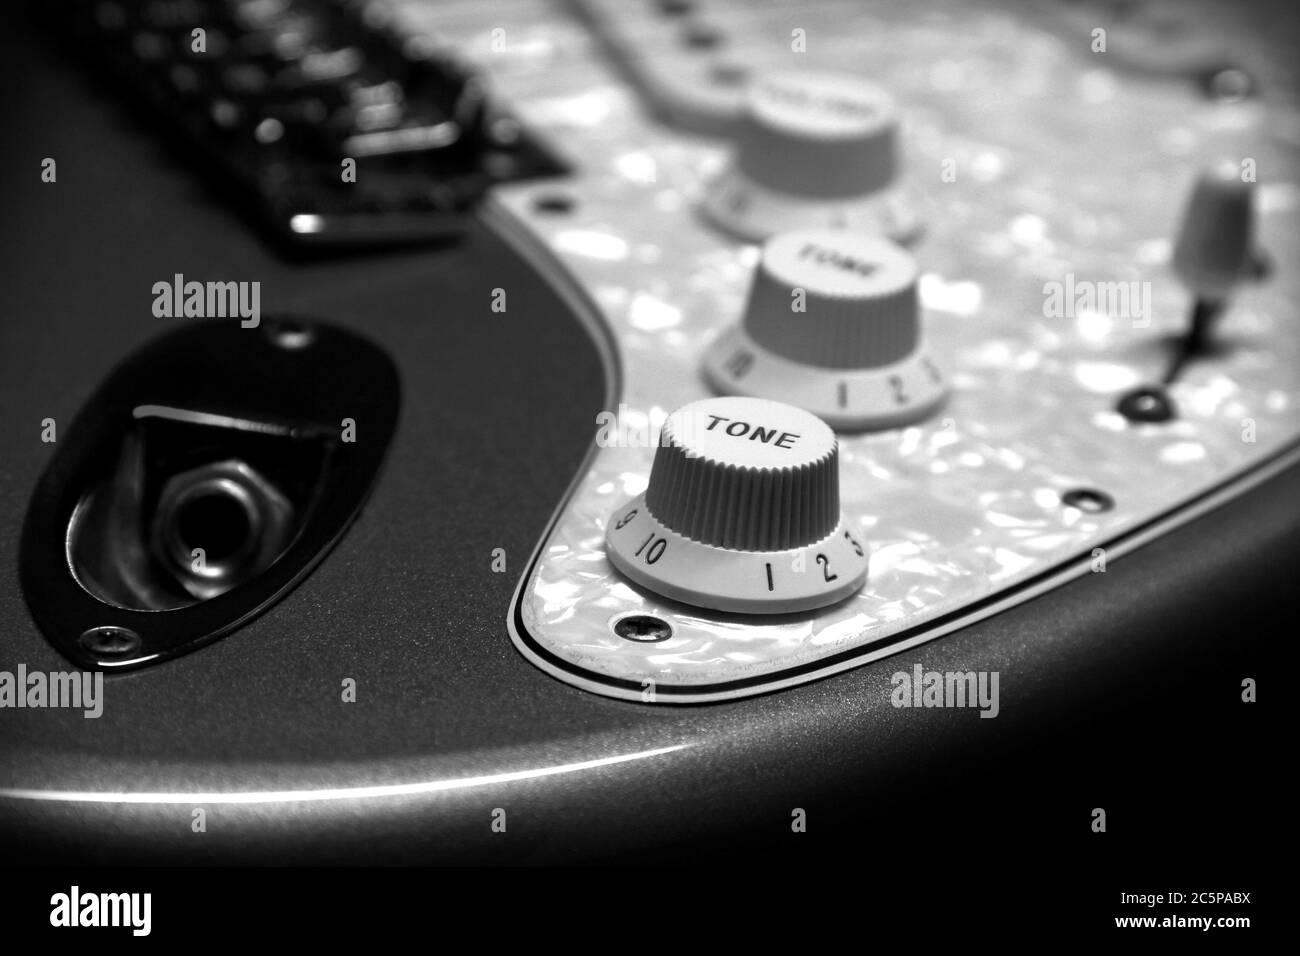 Black and white detail of a Fender Stratocaster electric guitar showing the input jack, tone and volume knobs, selector switch, white pearl pickguard, bridge, and pickups. Stock Photo